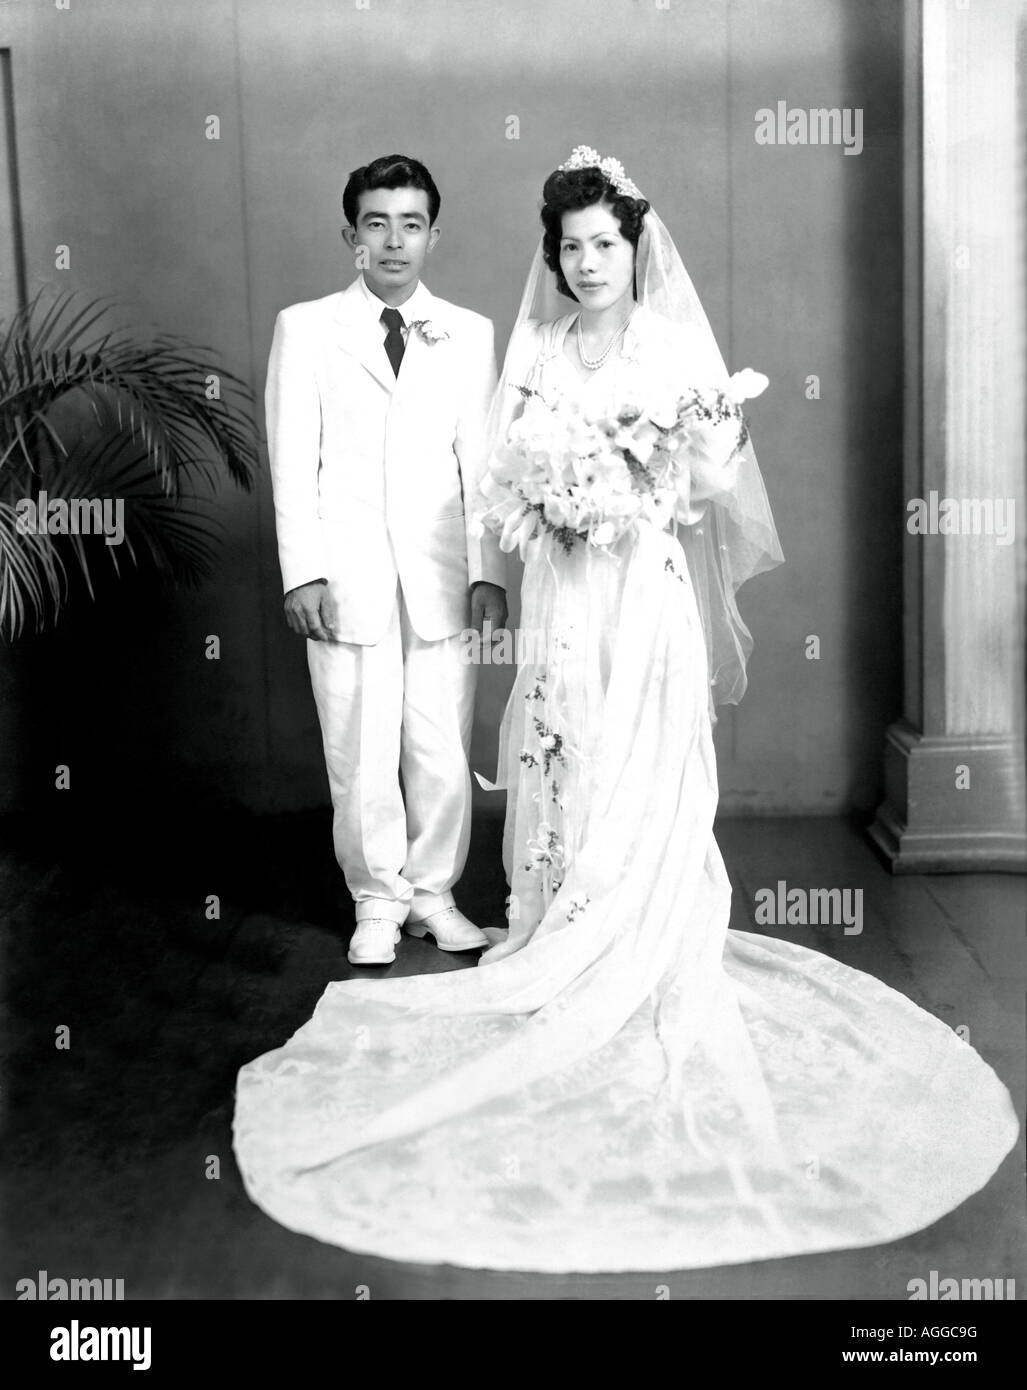 Married Couple 1960s Stock Photos & Married Couple 1960s Stock Images - Alamy